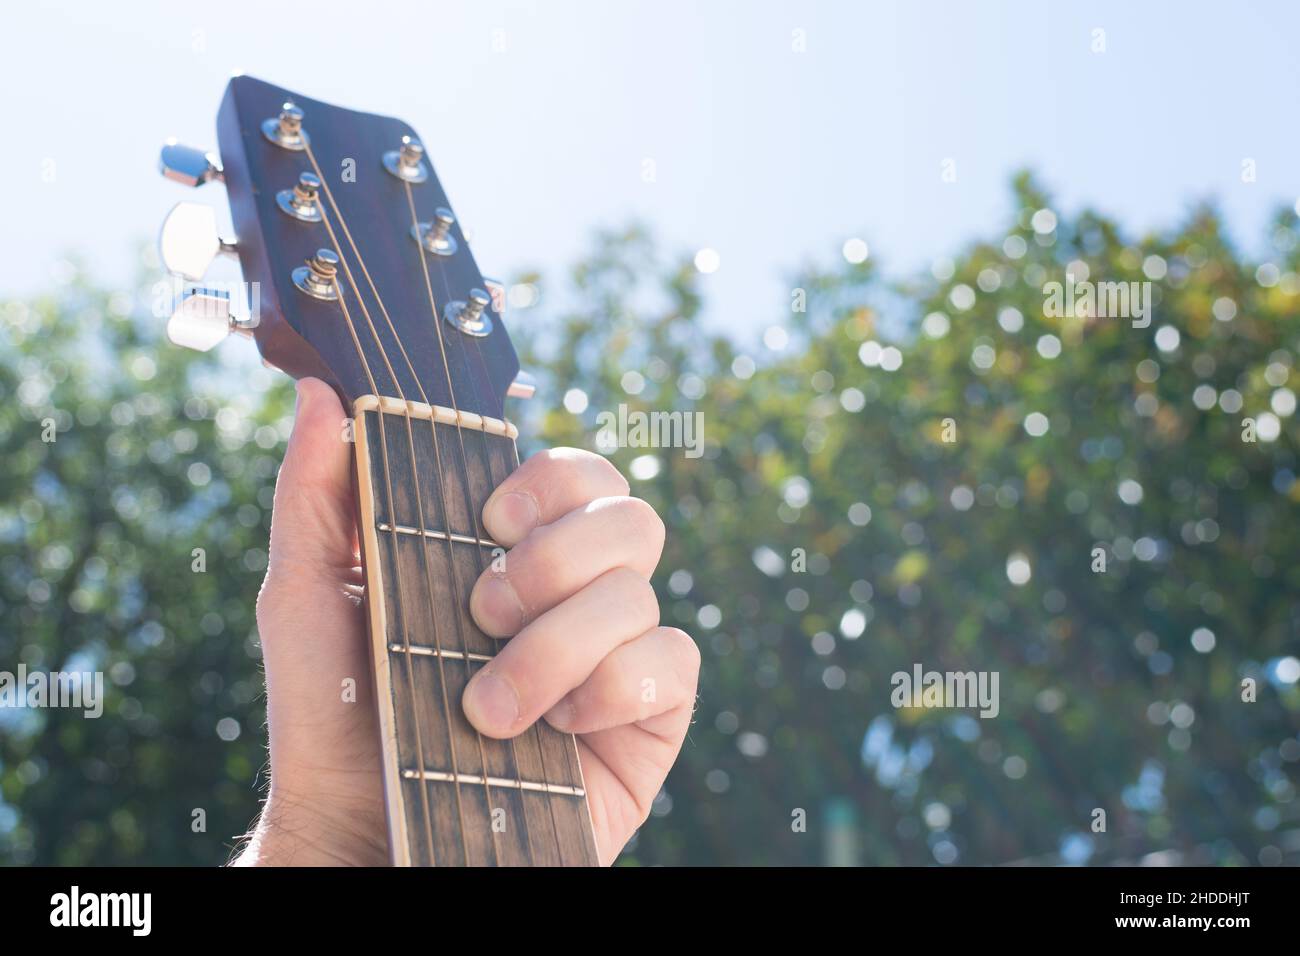 Selective focus of a hand holding an acoustic guitar outdoors, with the sky and greenery in the background Stock Photo